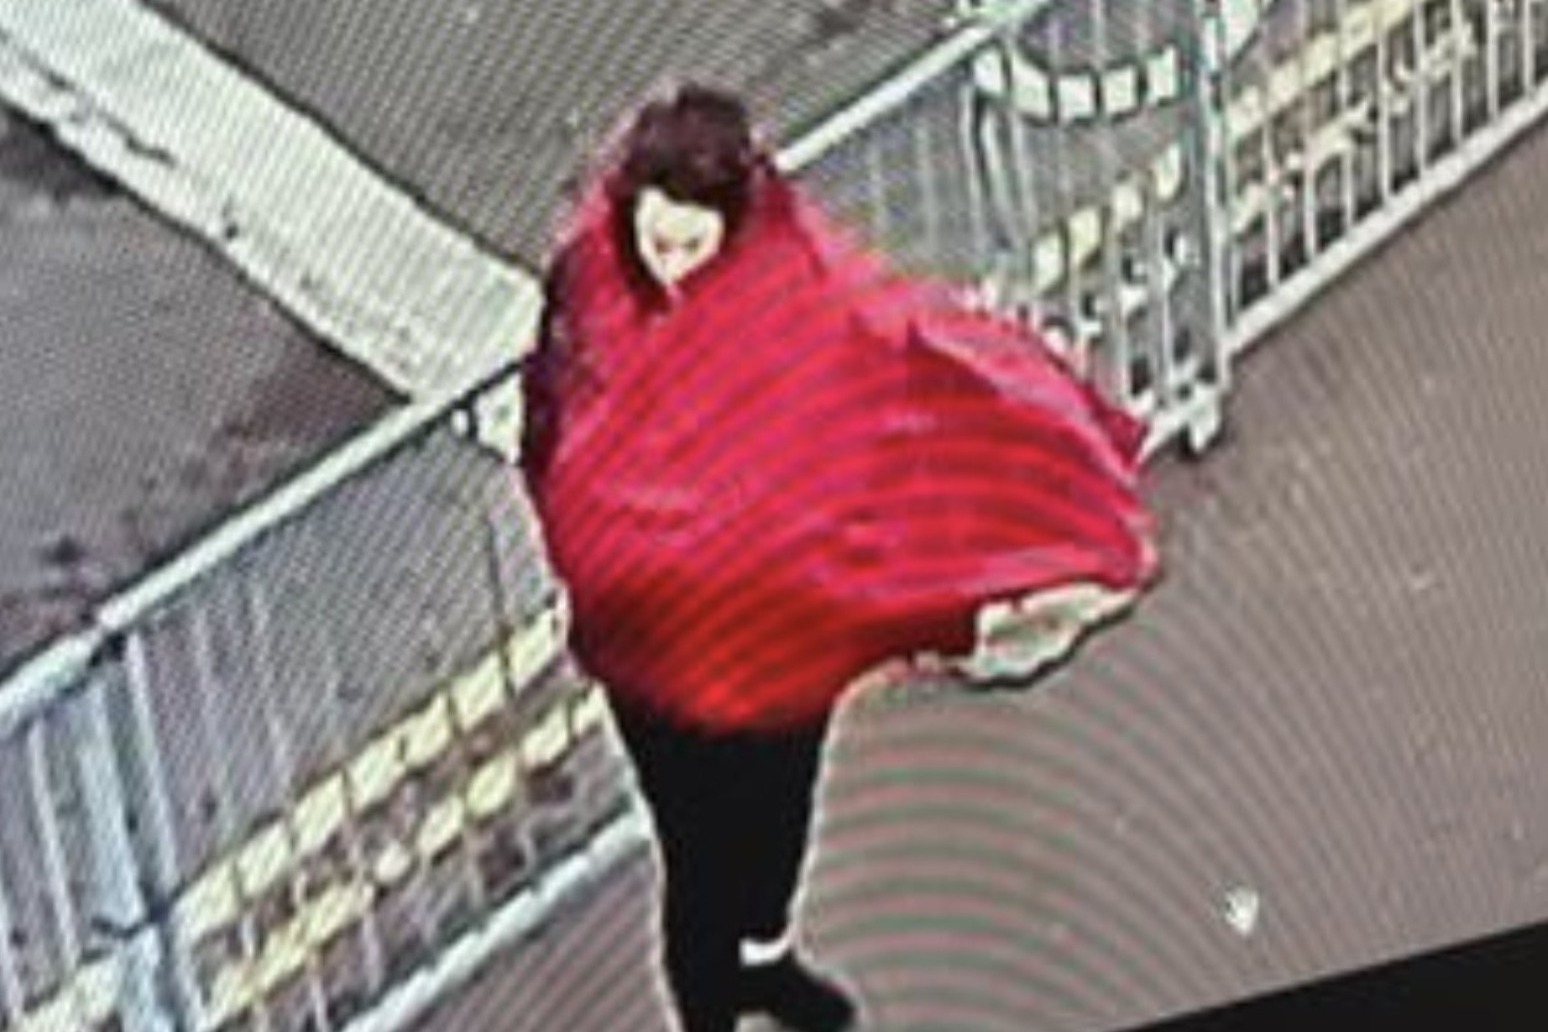 CCTV image released in search for missing couple with newborn baby 